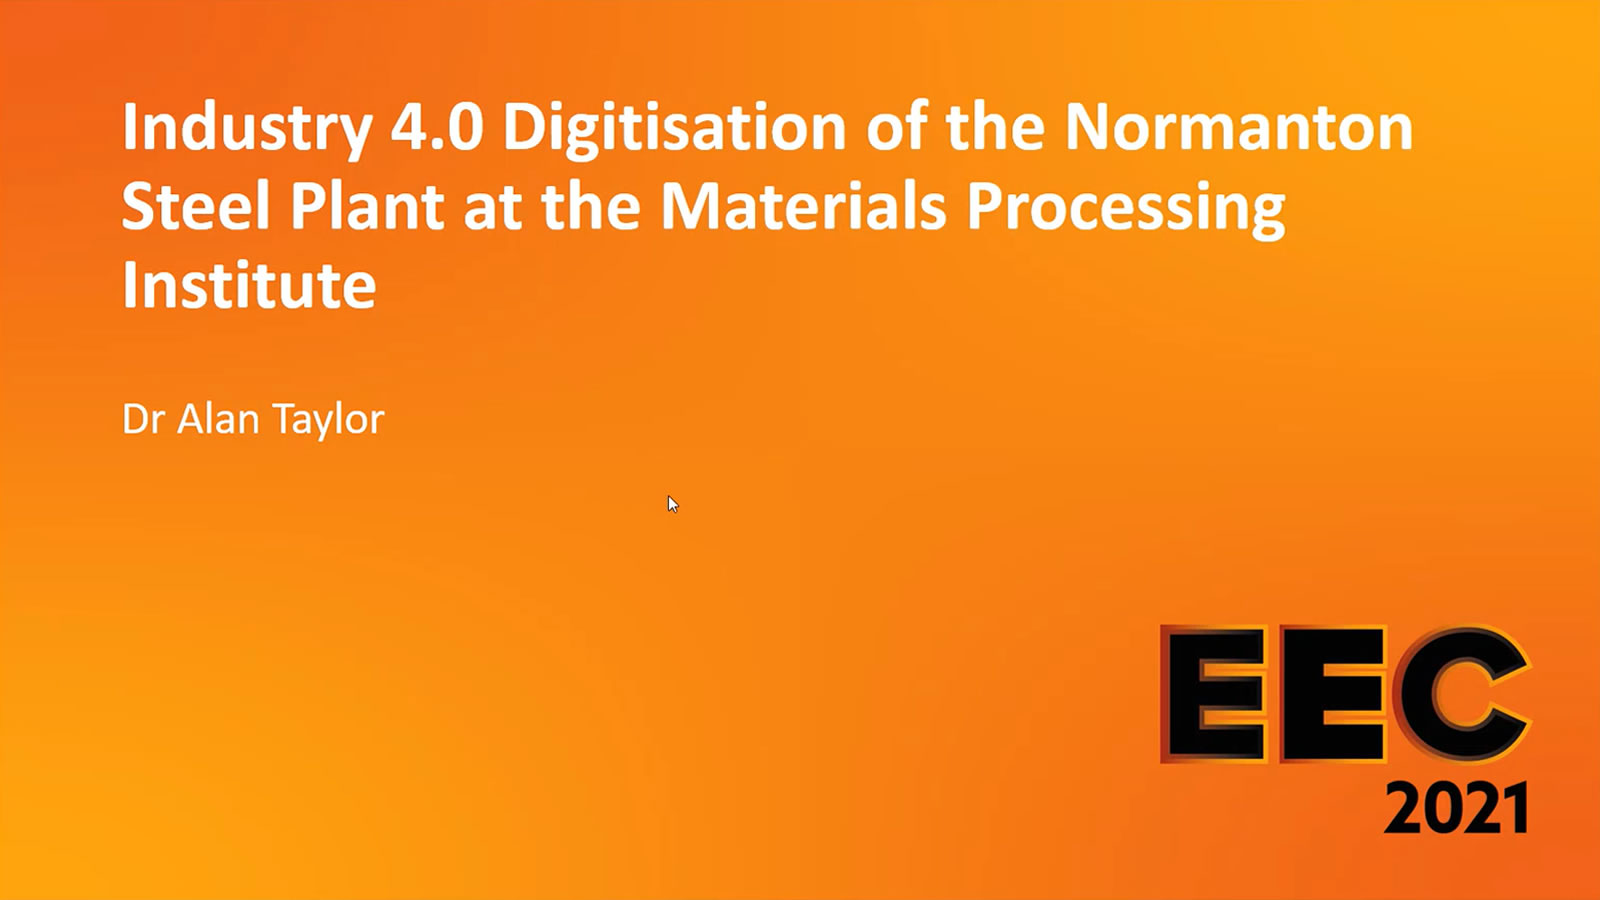 Industry 4.0 Digitisation of the Normanton Steel Plant at the Materials Processing Institute - Dr Alan Taylor at EEC 2021